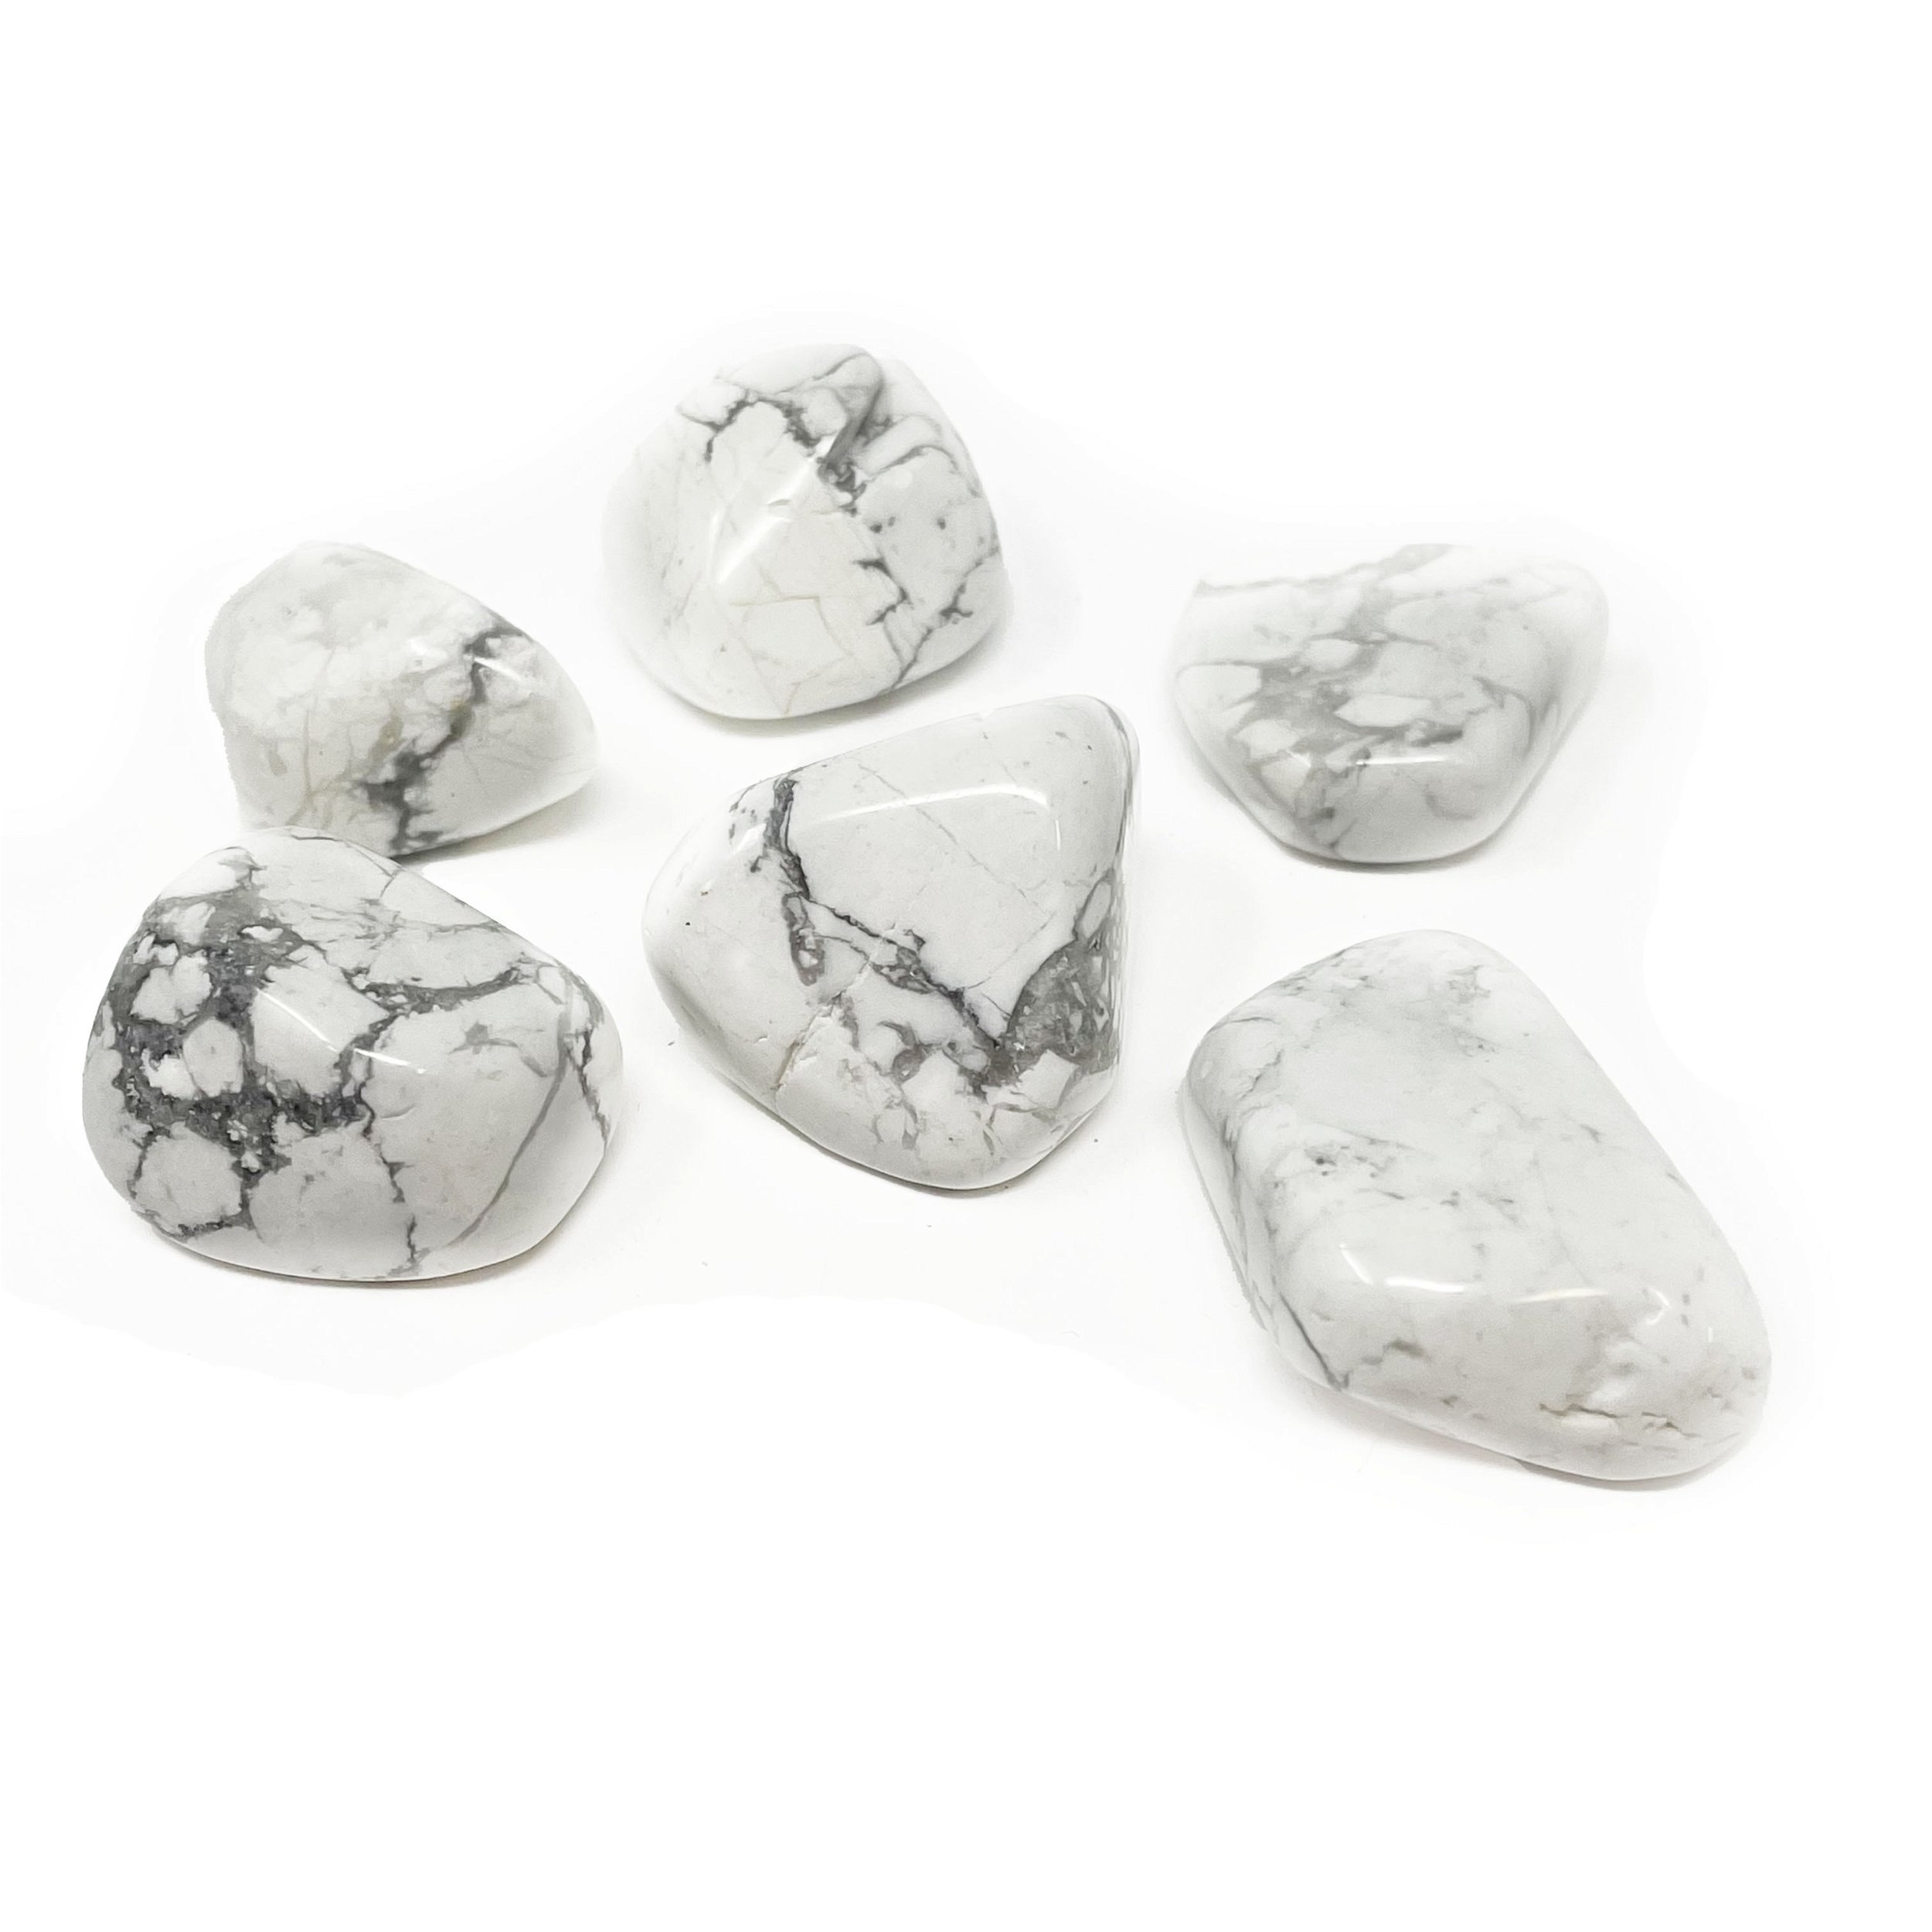 Tumbled White Howlite From Canada (Singles)